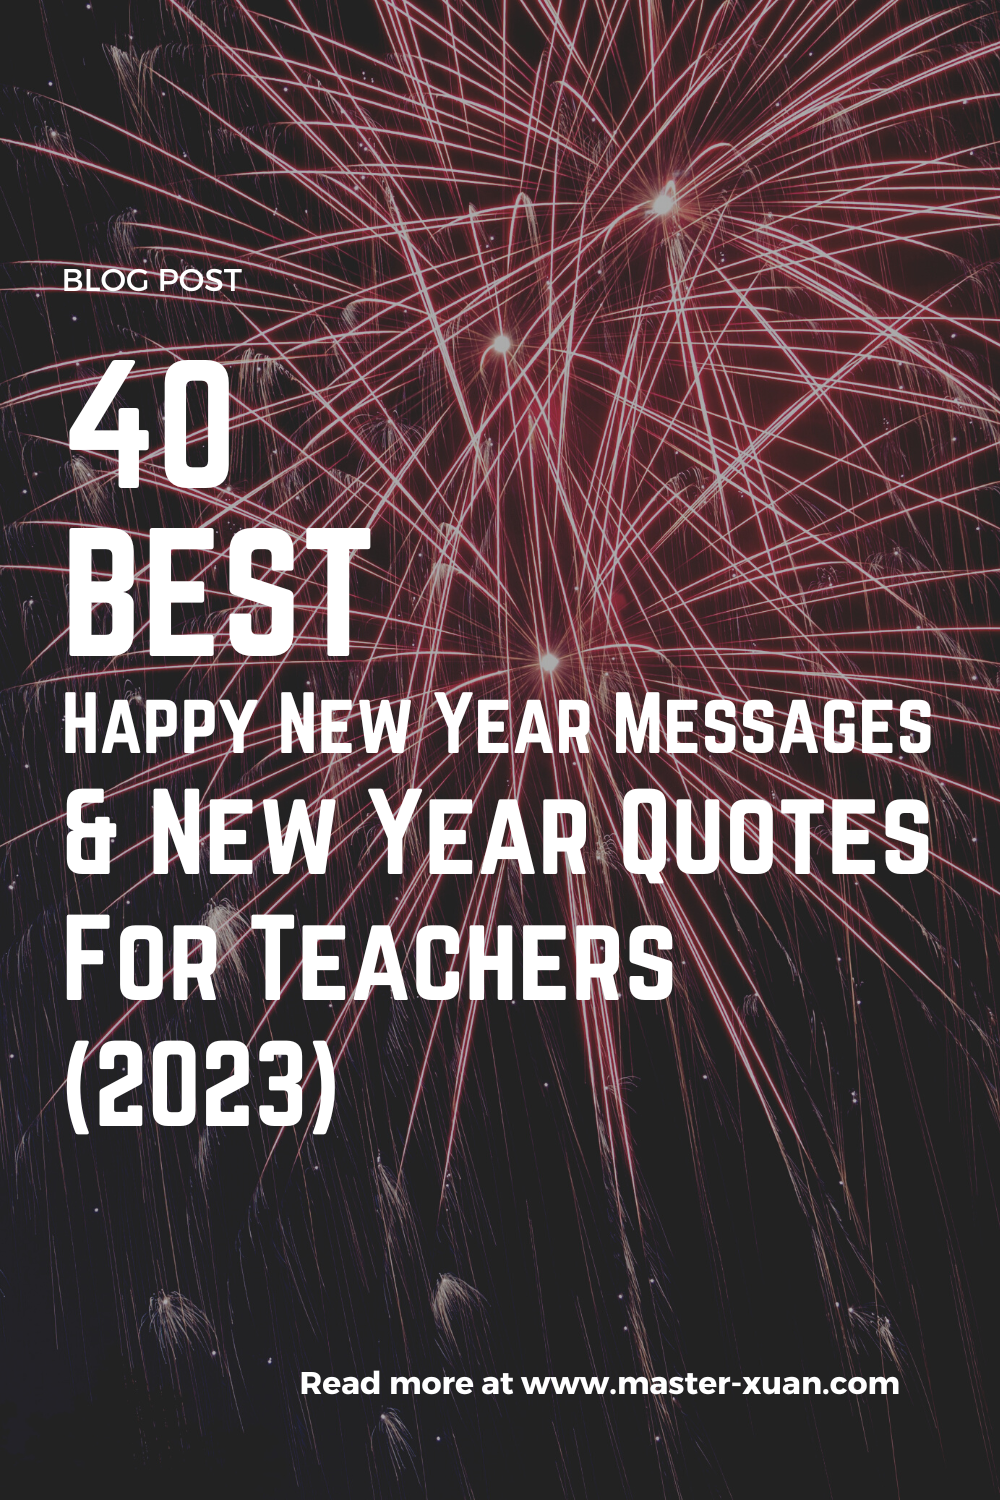 40 best happy new year messages & new year quotes for teachers 2023 with fireworks at the back